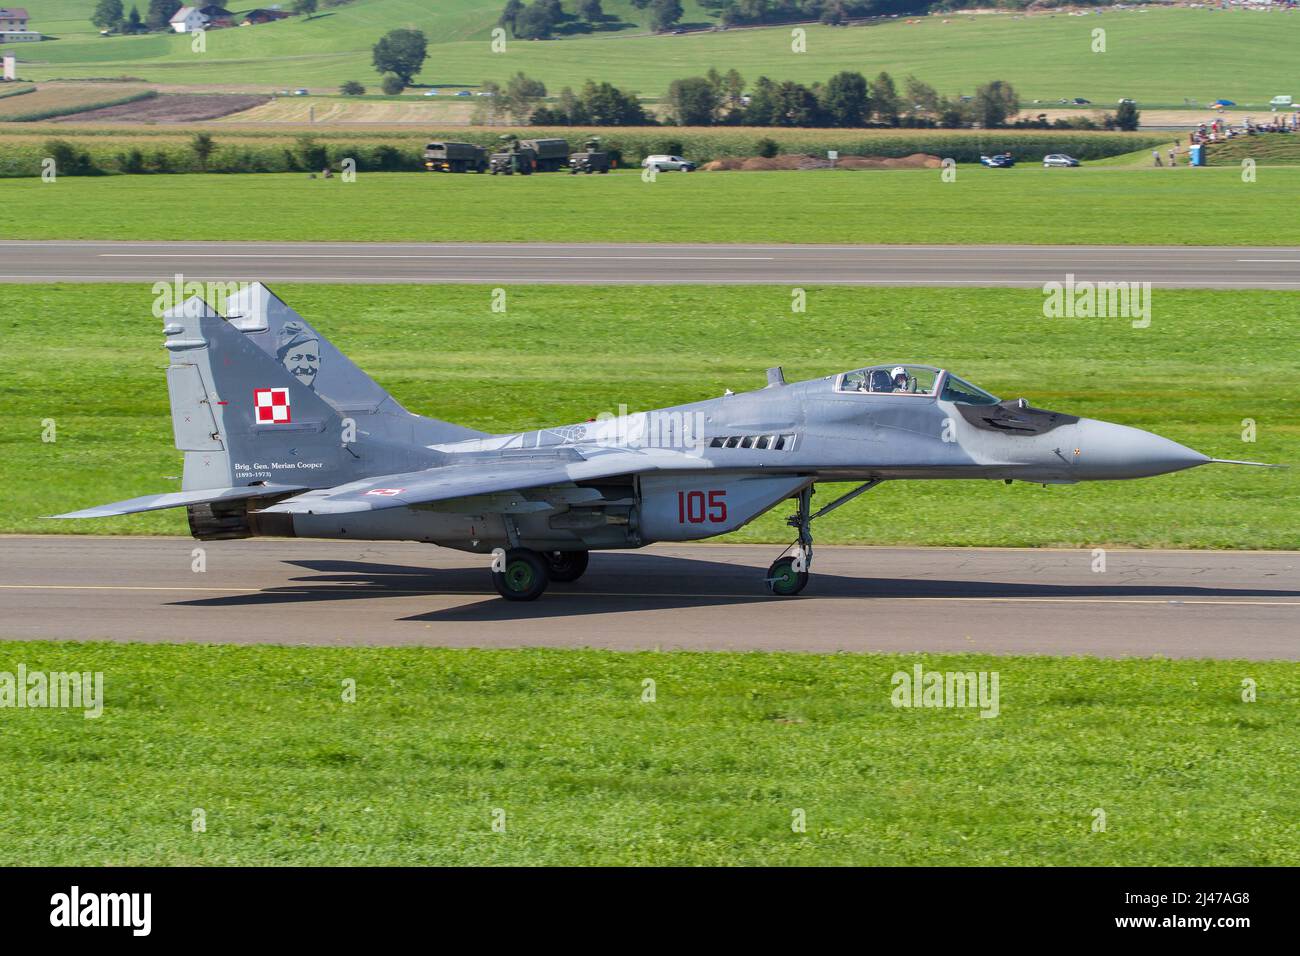 Polish Air Force Mig 29 fighter jet from Poland taking off with full afterburner to a mission Stock Photo